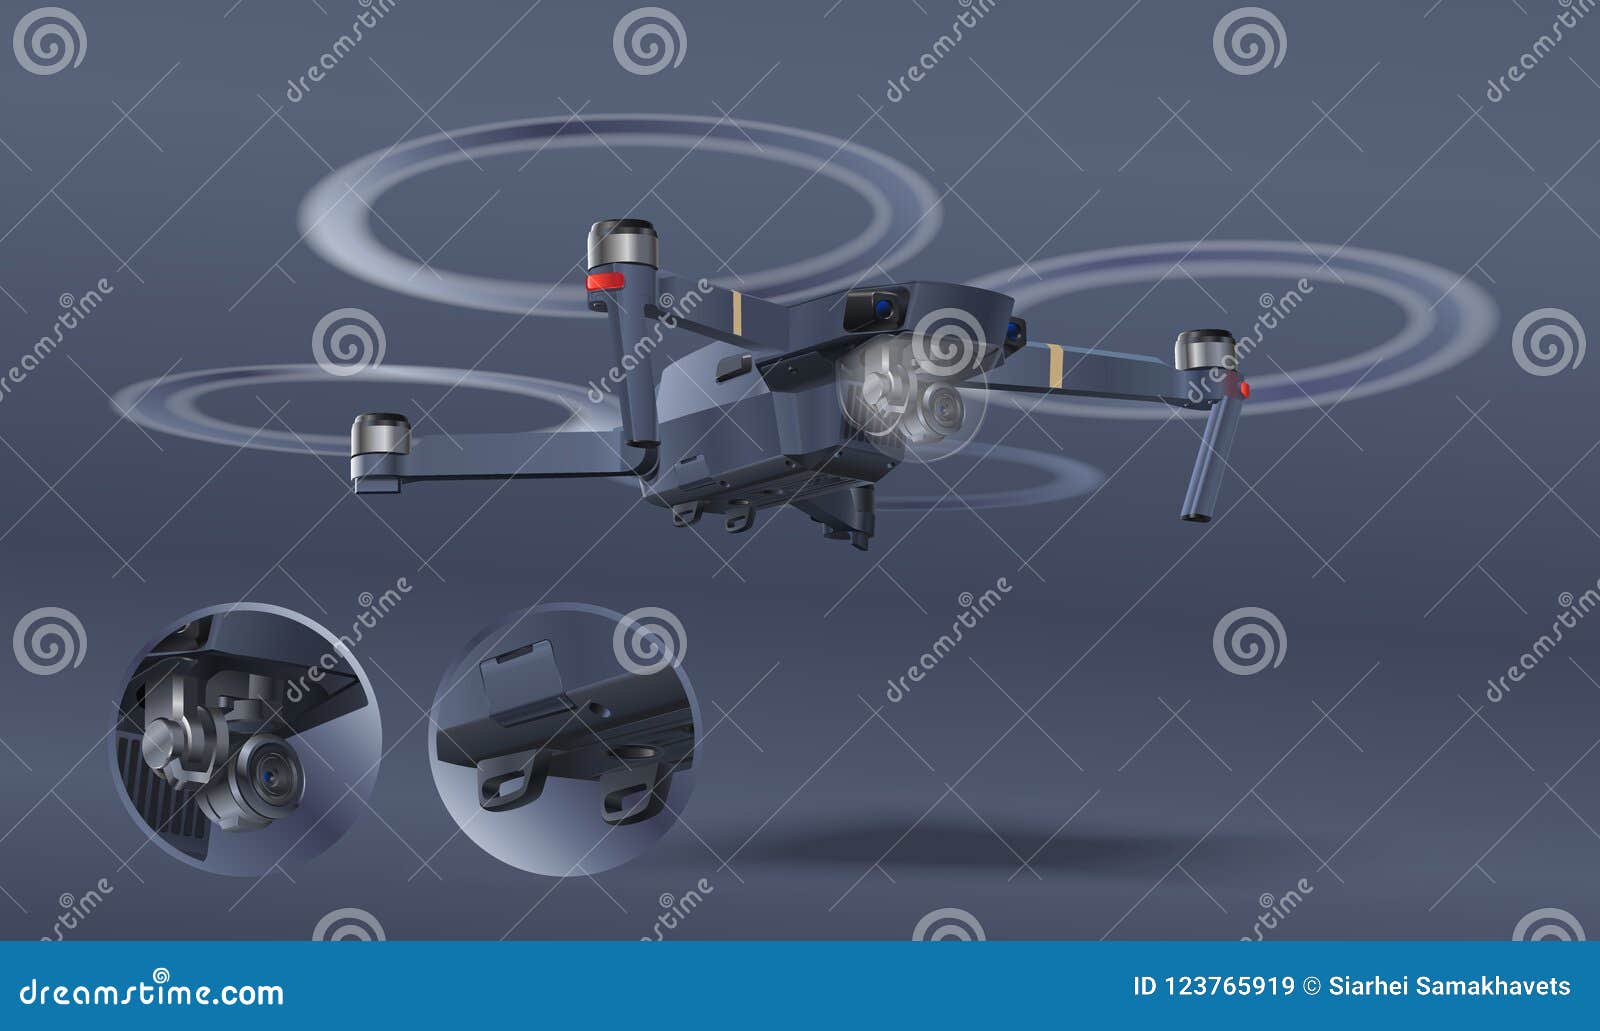 drone  on white background. photography and video created. air copter concept with camera. shooting supported drone. reali